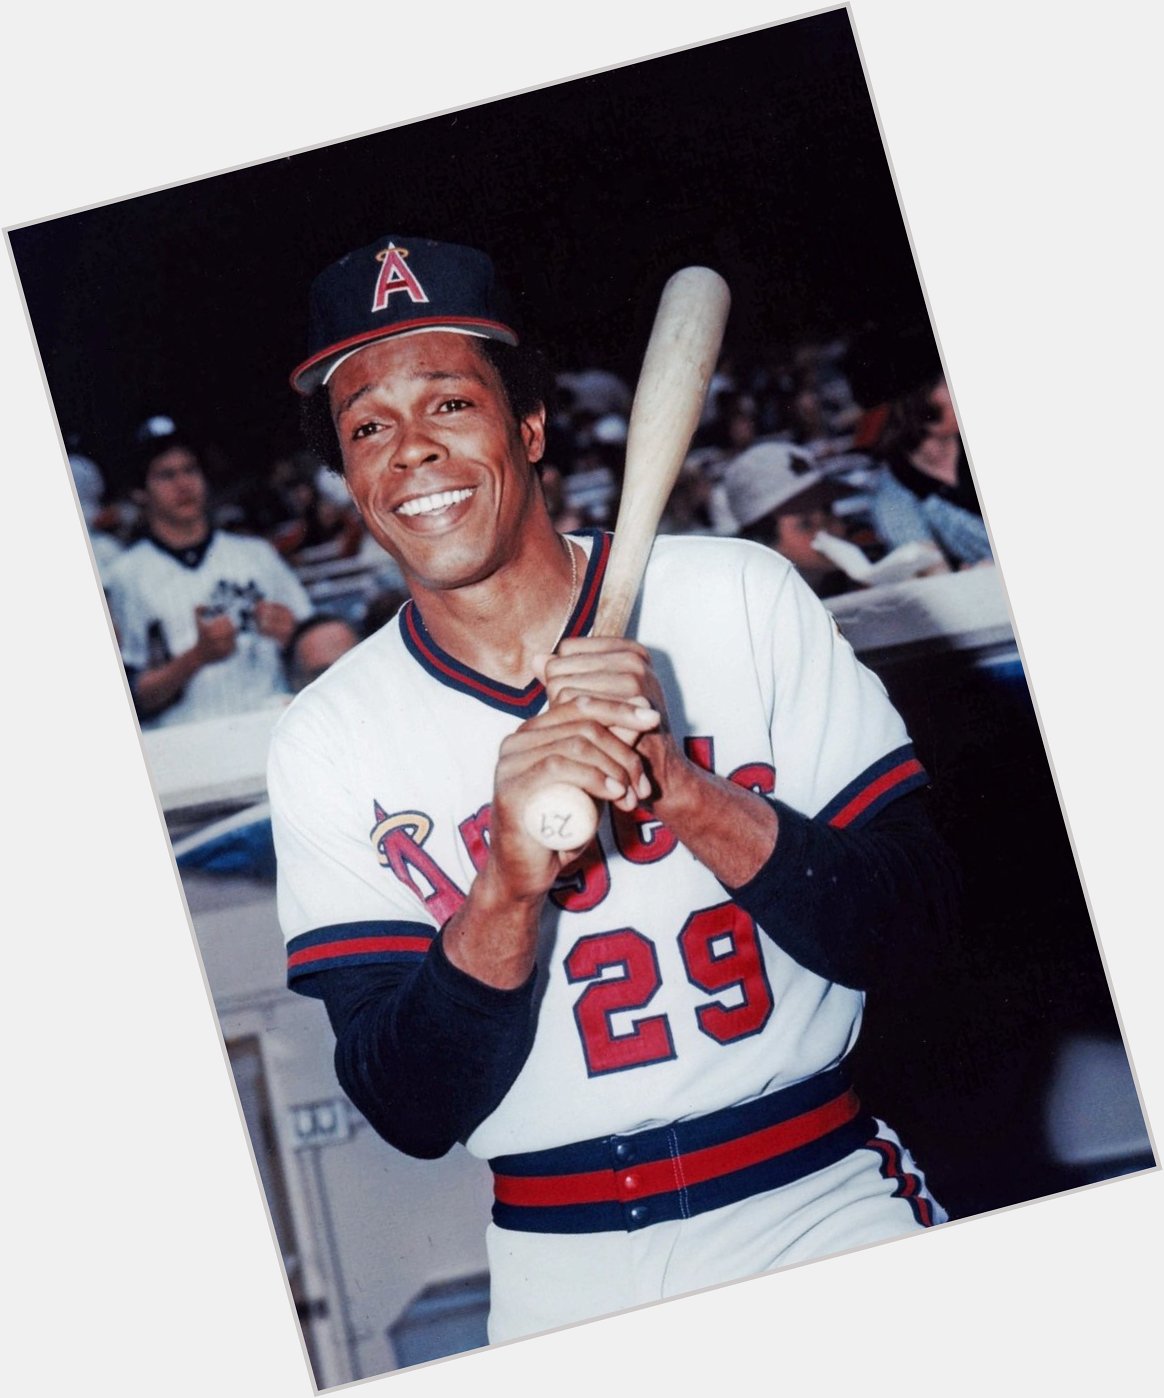 Happy Birthday to my all-time favorite baseball player, Rod Carew!  